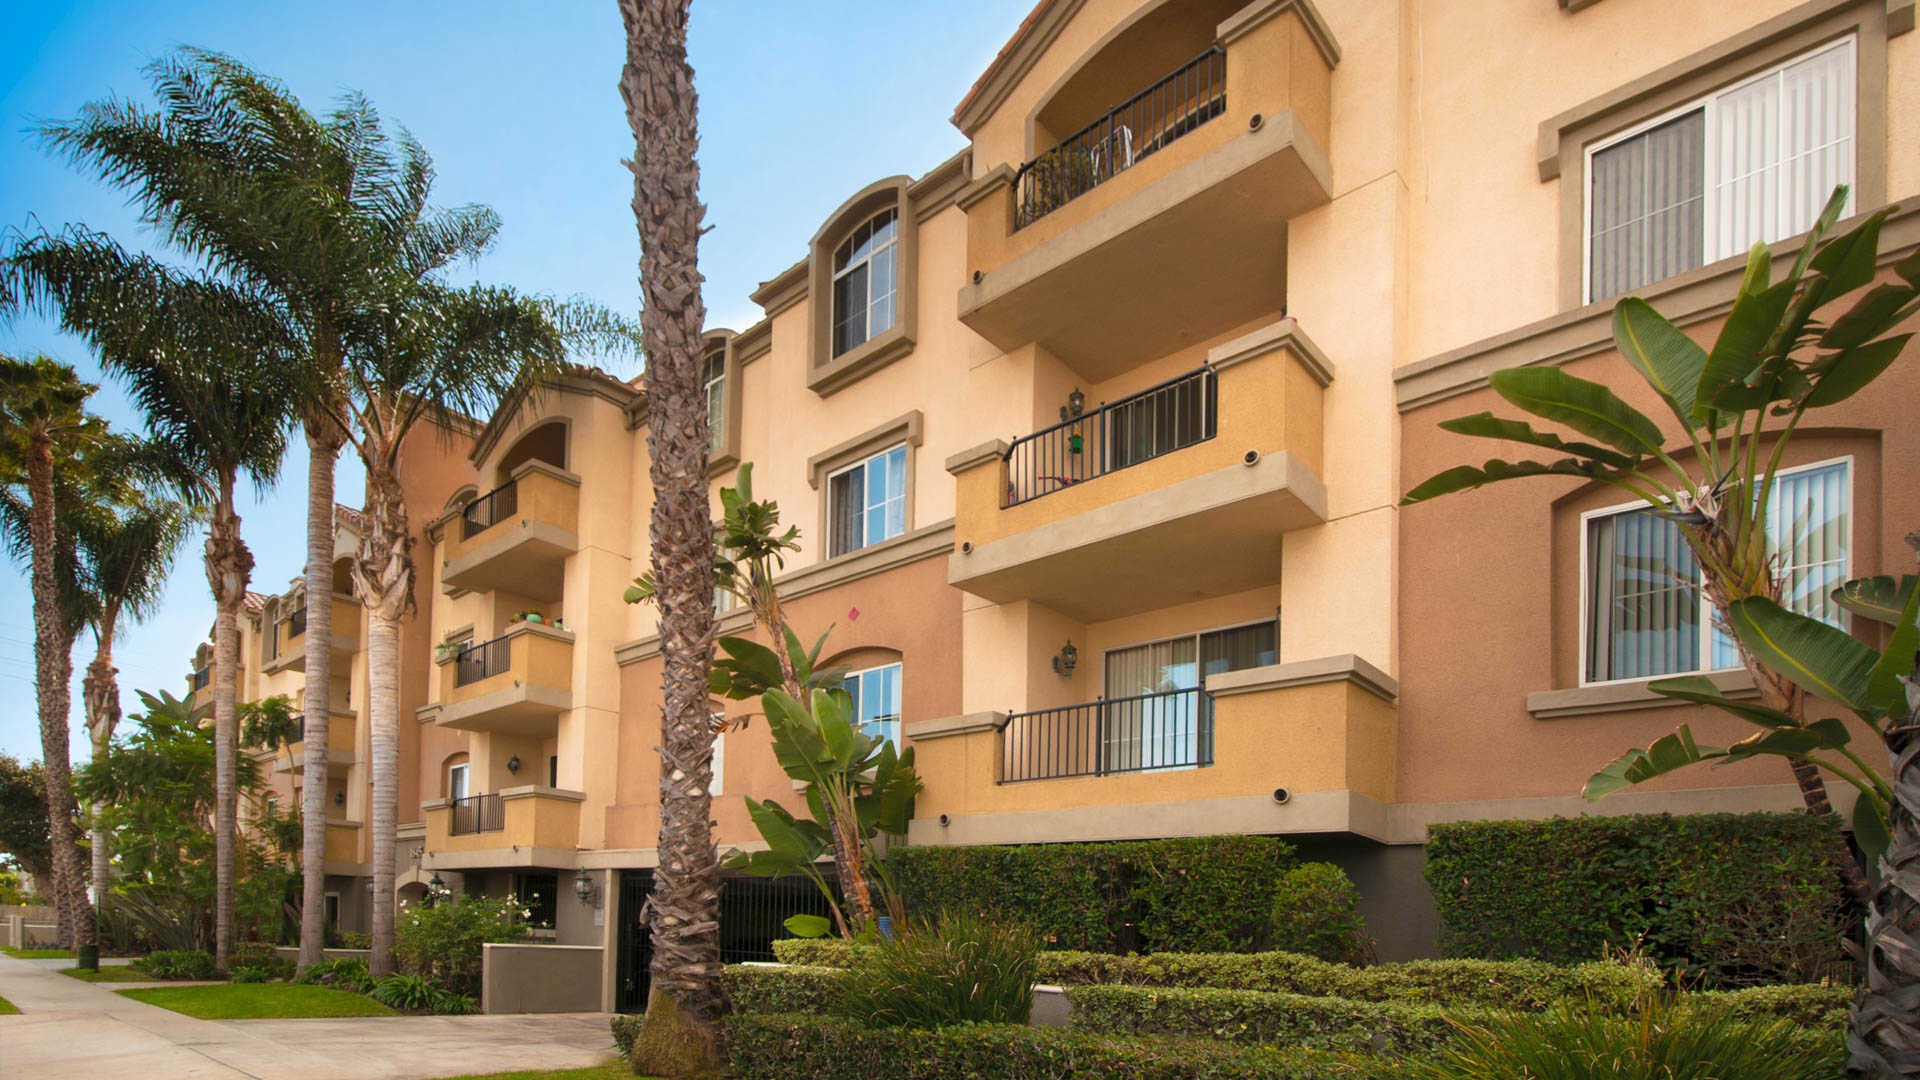 Check Out Apartments For Rent Near USC At Safest Neighborhoods